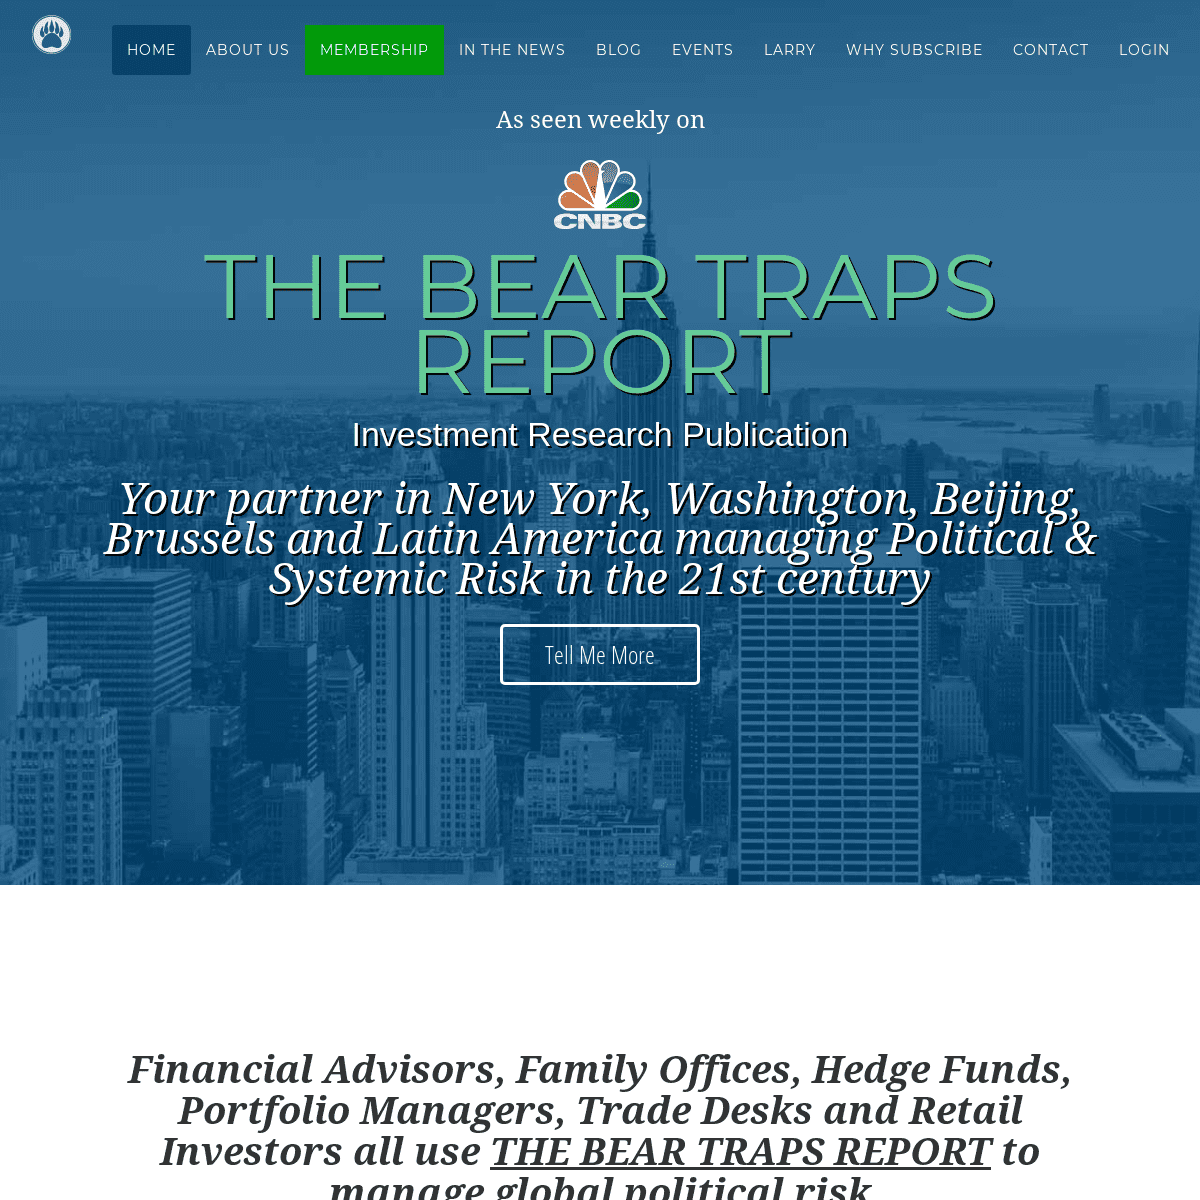 A complete backup of https://thebeartrapsreport.com